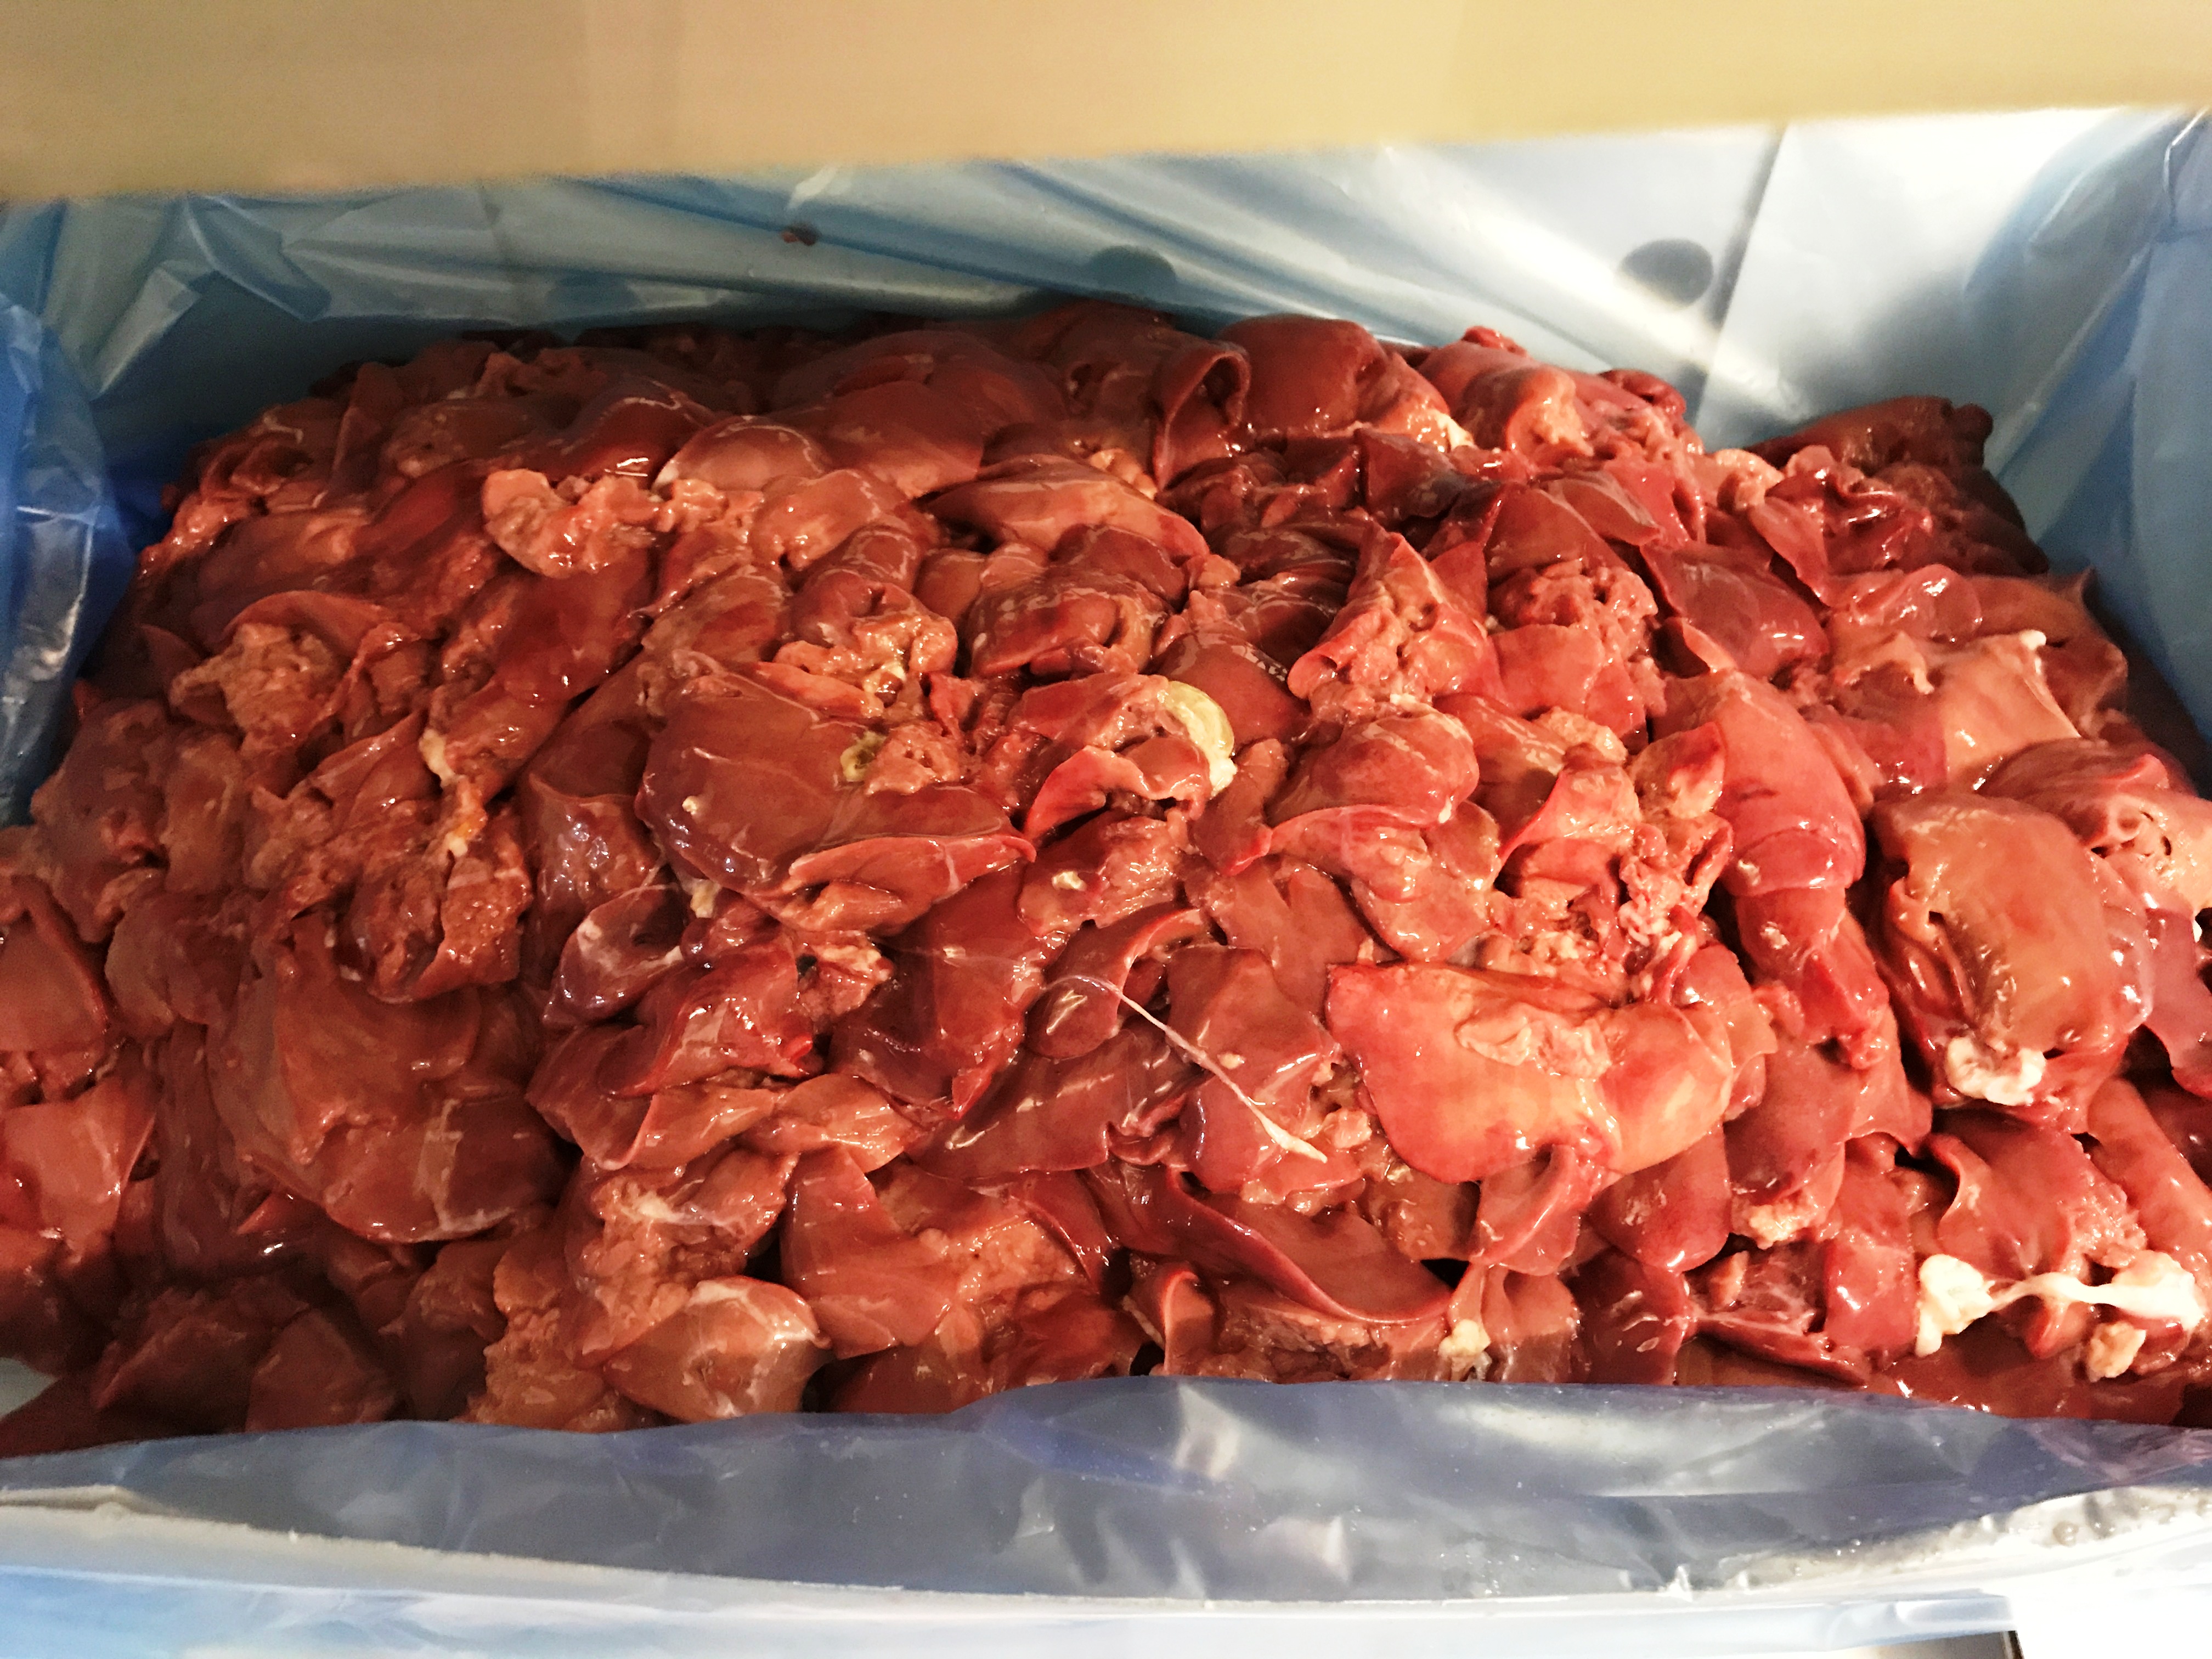 Offal Products at Iqbal Poultry